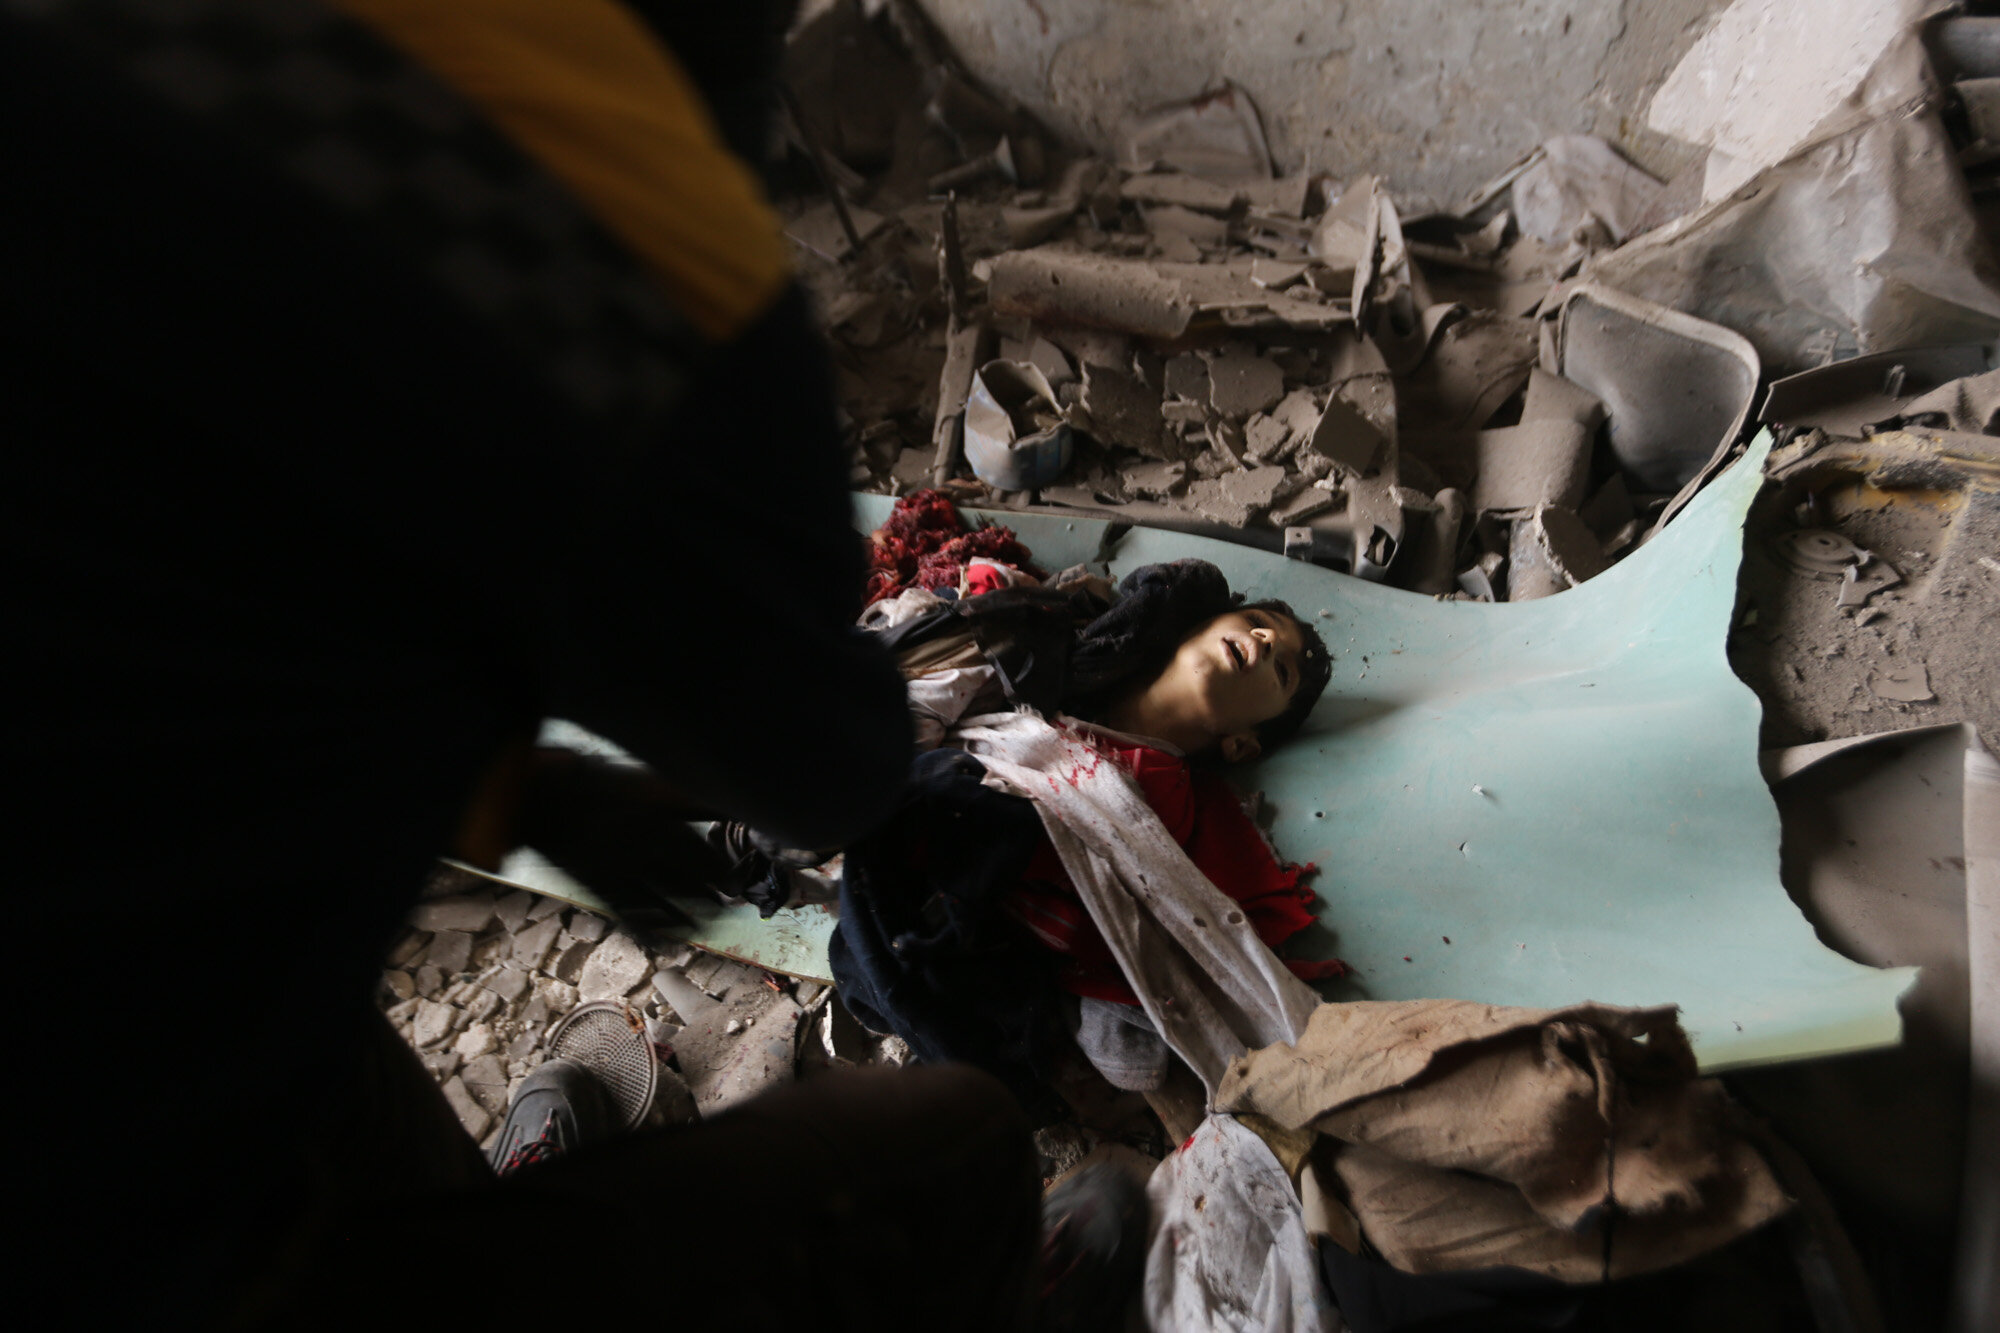  An emergency crew recovers the body of a boy killed in a government airstrike in the city of Idlib, Syria on Feb. 11, 2020. (AP Photo/Ghaith Alsayed) 